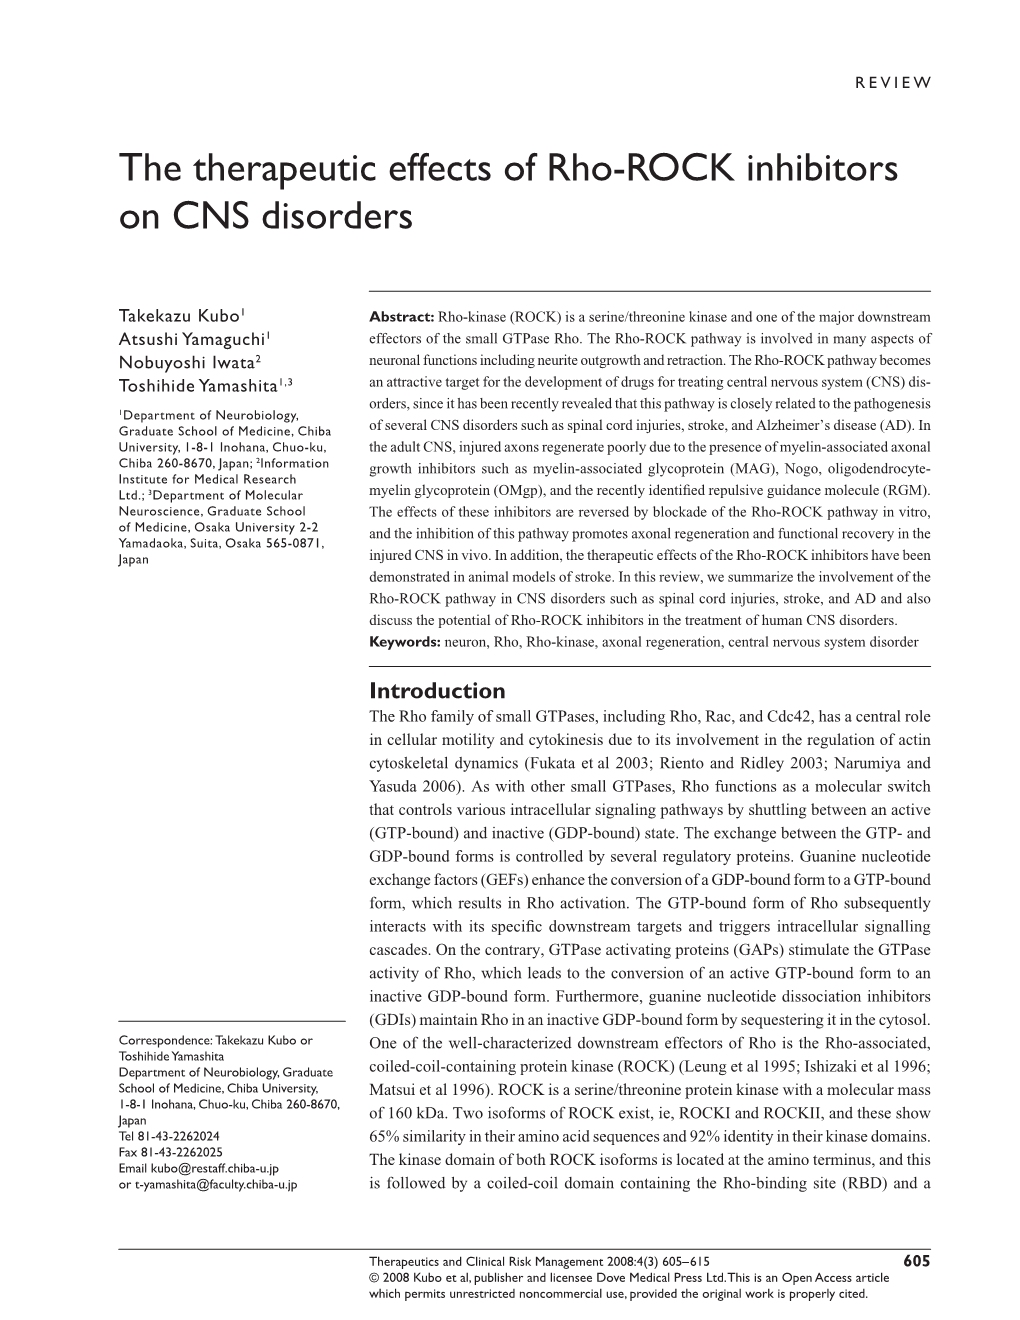 The Therapeutic Effects of Rho-ROCK Inhibitors on CNS Disorders